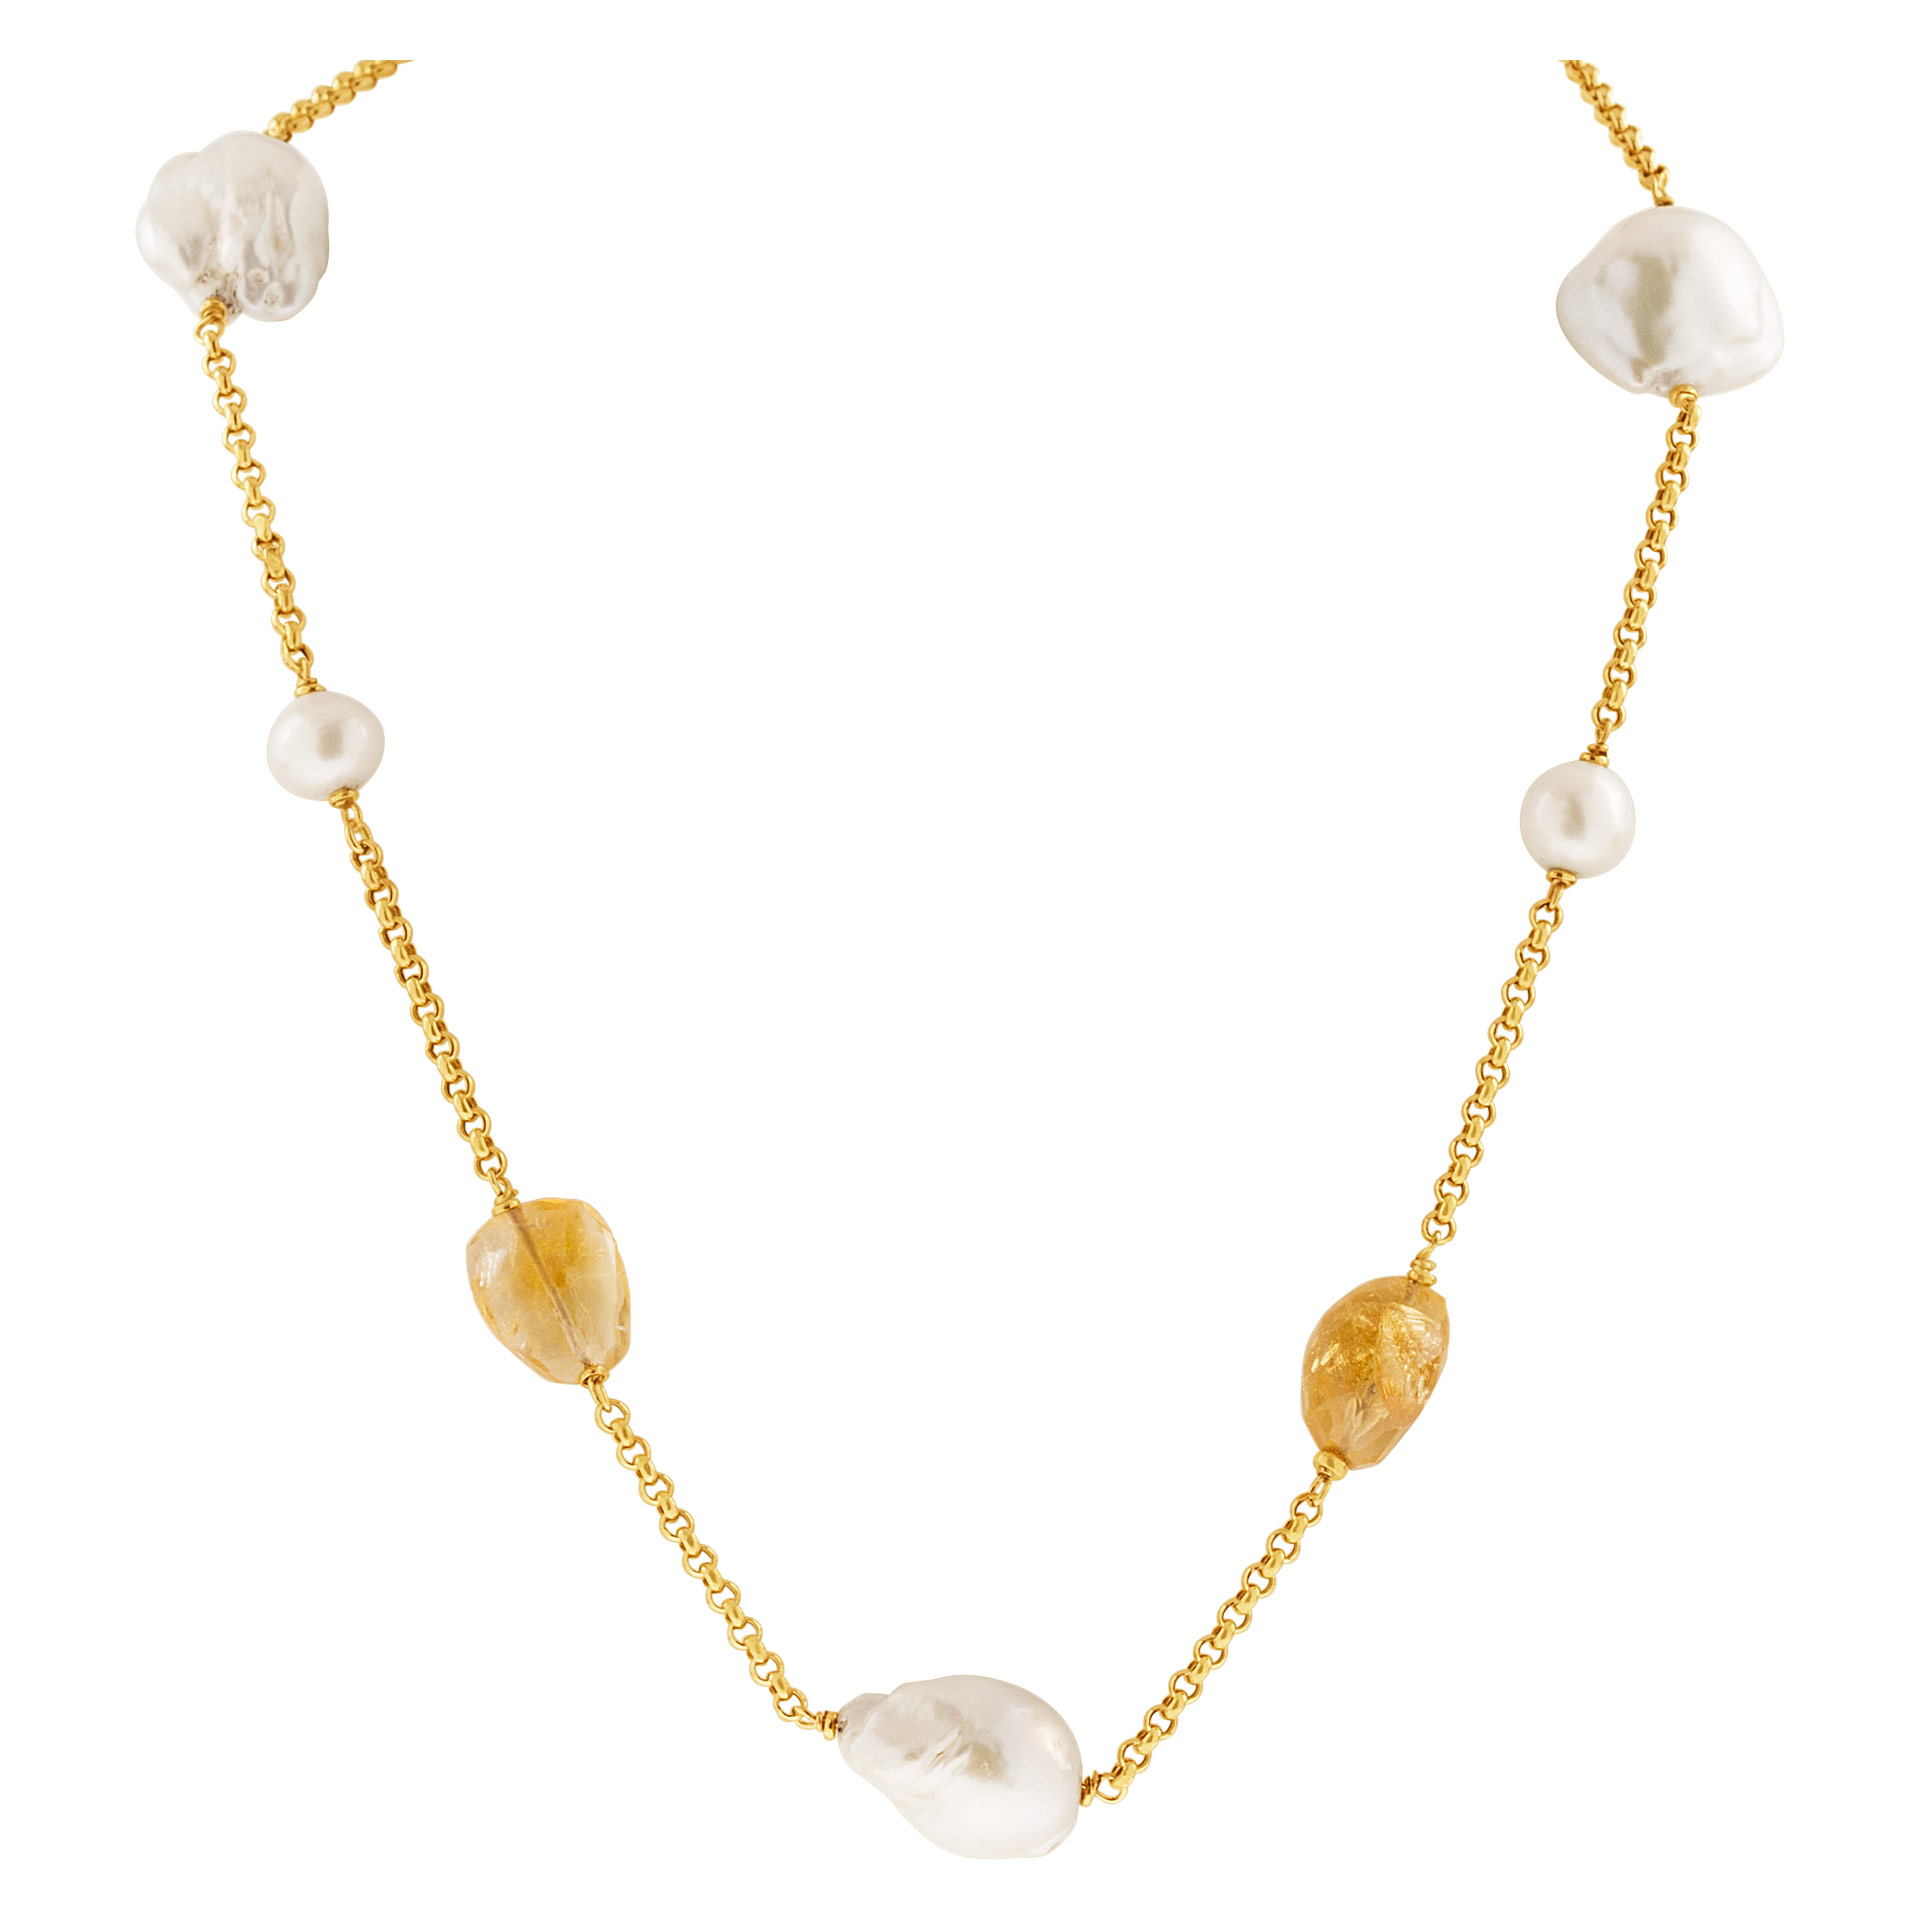 Stylish and funky 14k yellow gold chain with big pearls image 1